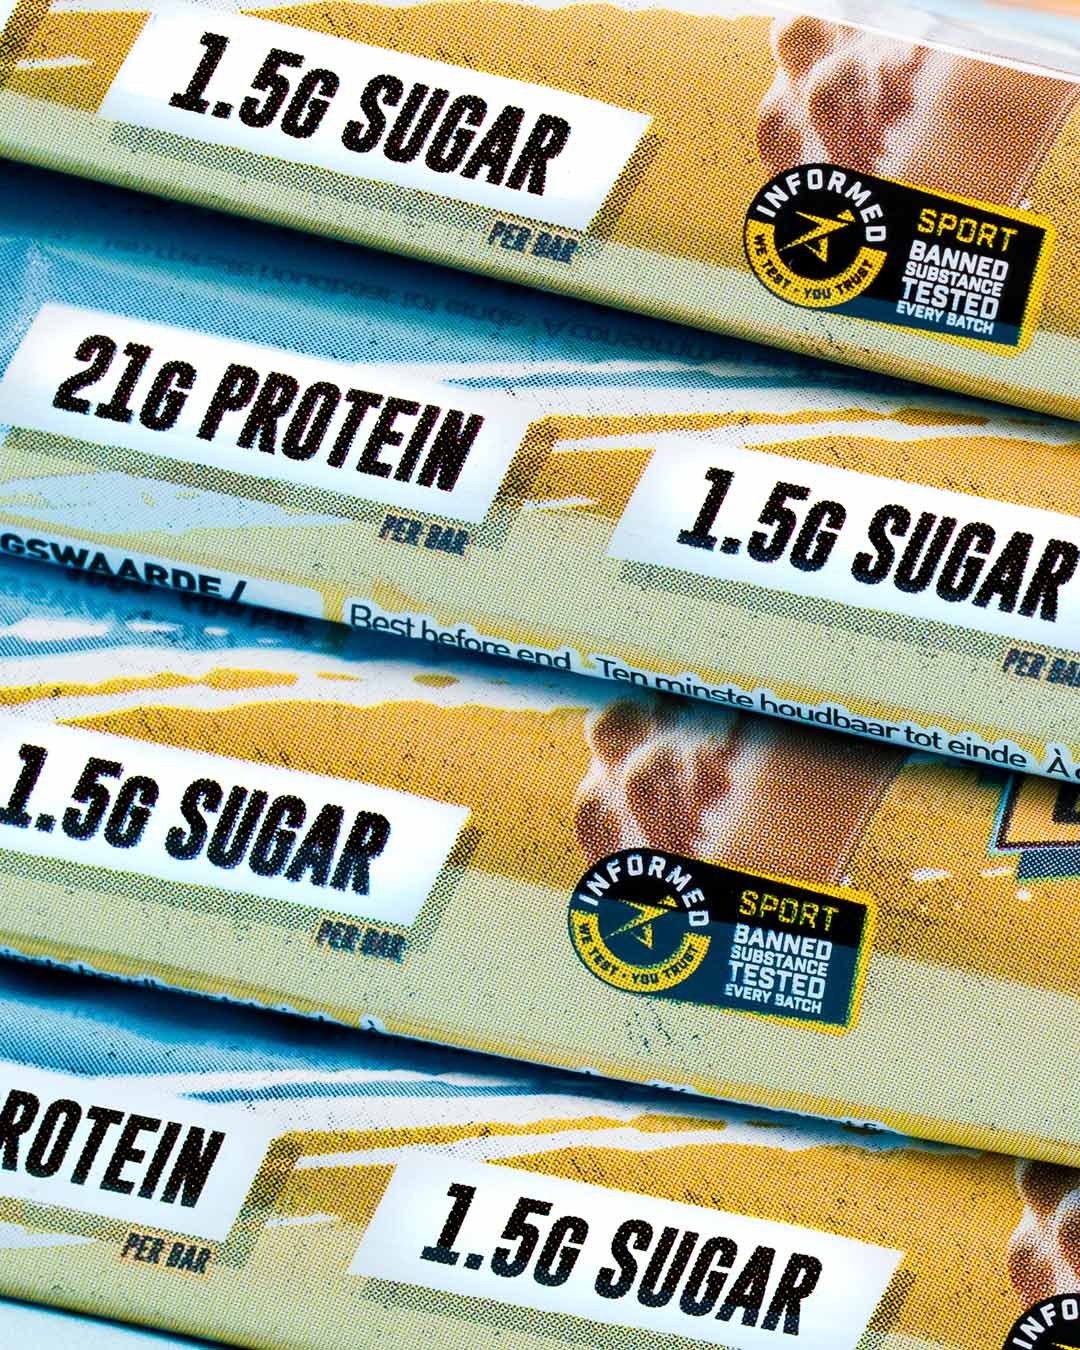 Chocolate Chip Cookie Dough Protein Bar - Subscribe & Save Exclusive